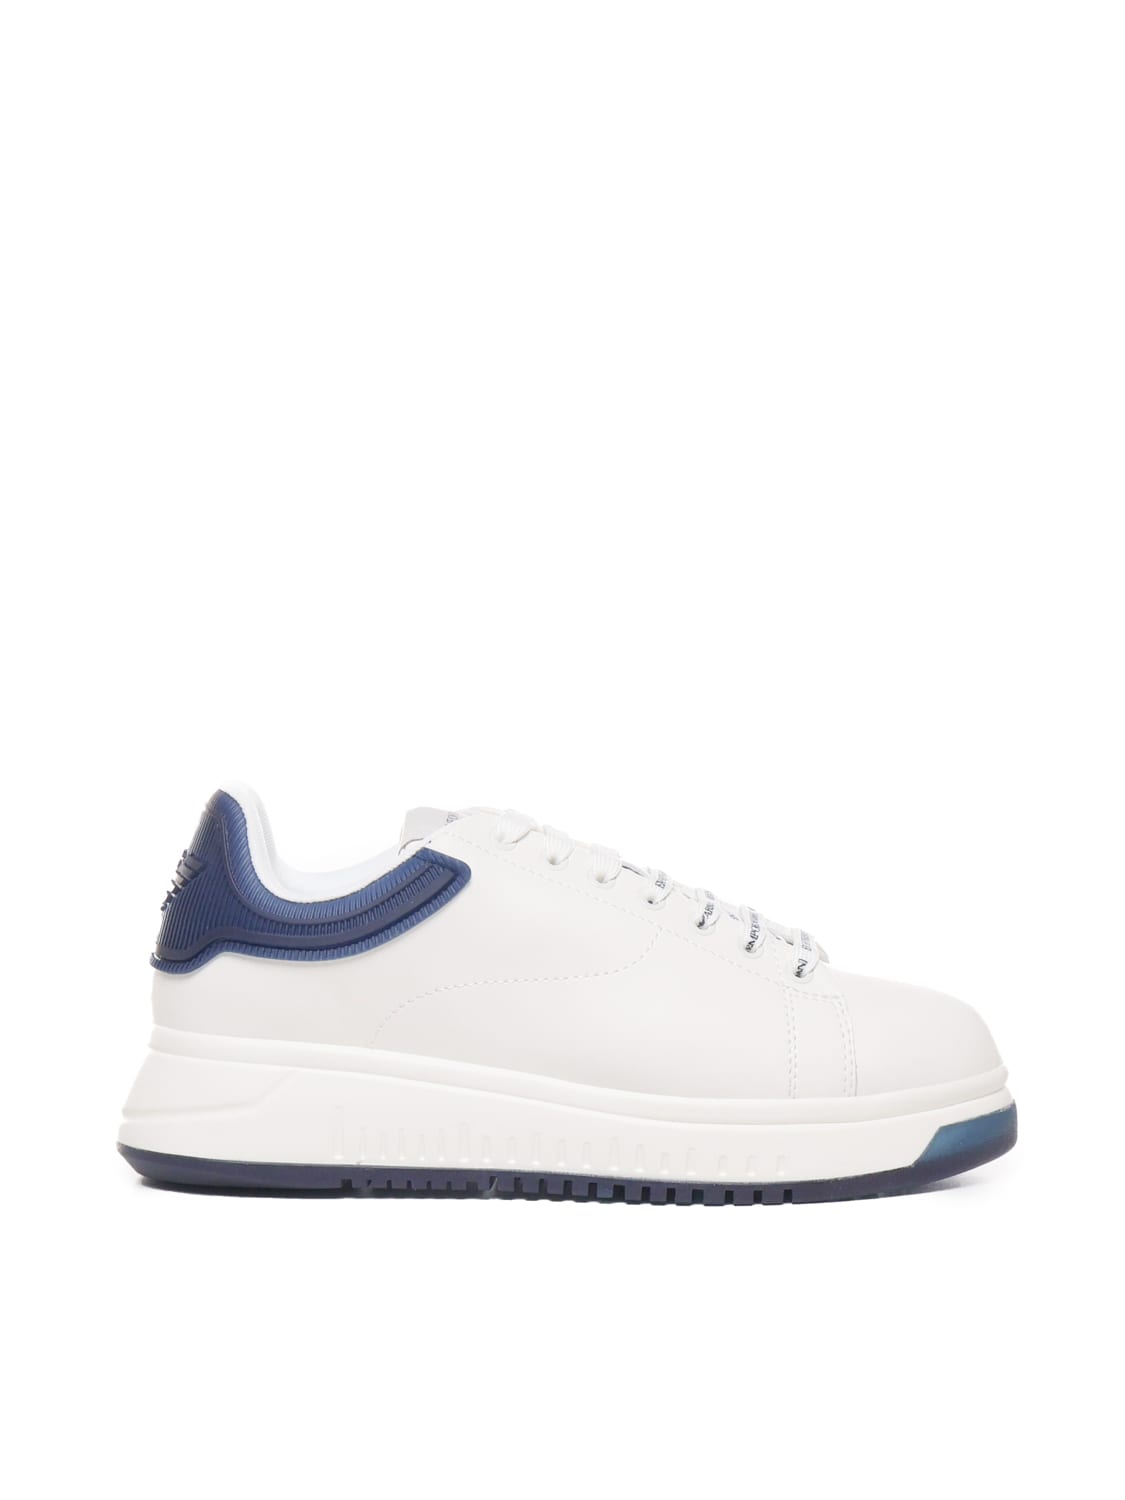 Shop Emporio Armani Sneakers With Contrasting Rivet In White, Blue